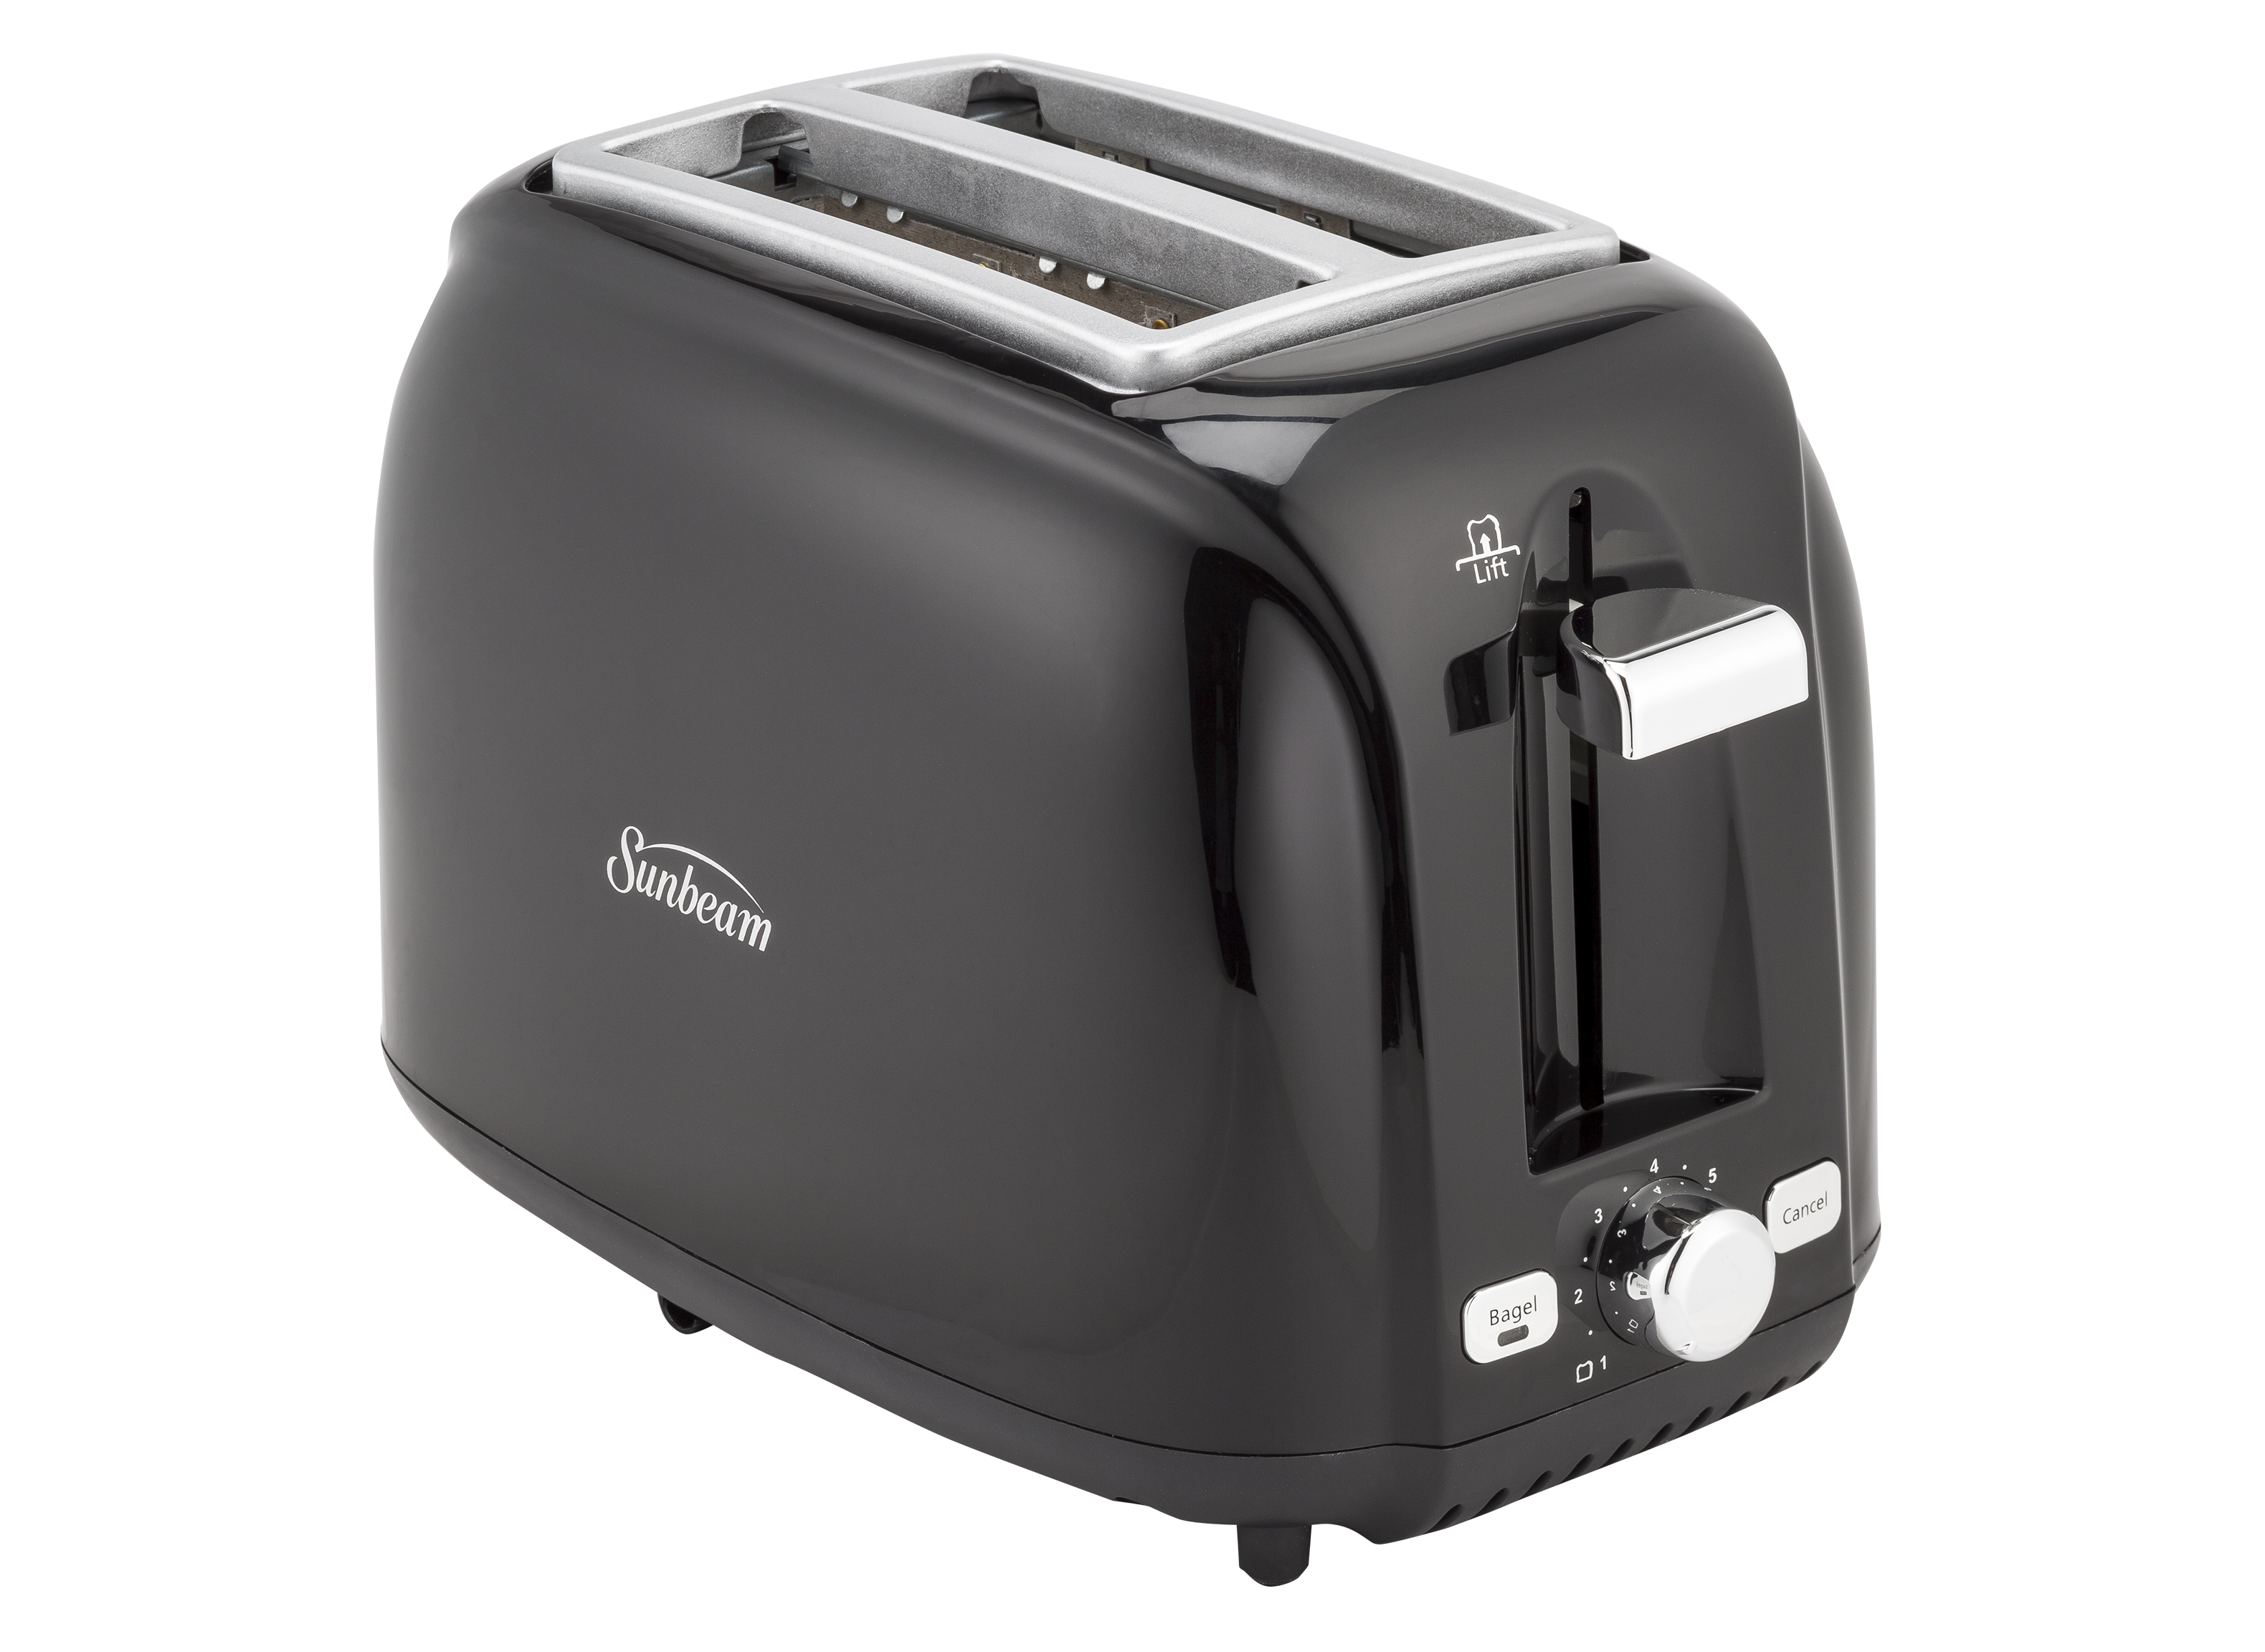 Sunbeam 2 Slice Toaster With Retractable Cord Black for sale online